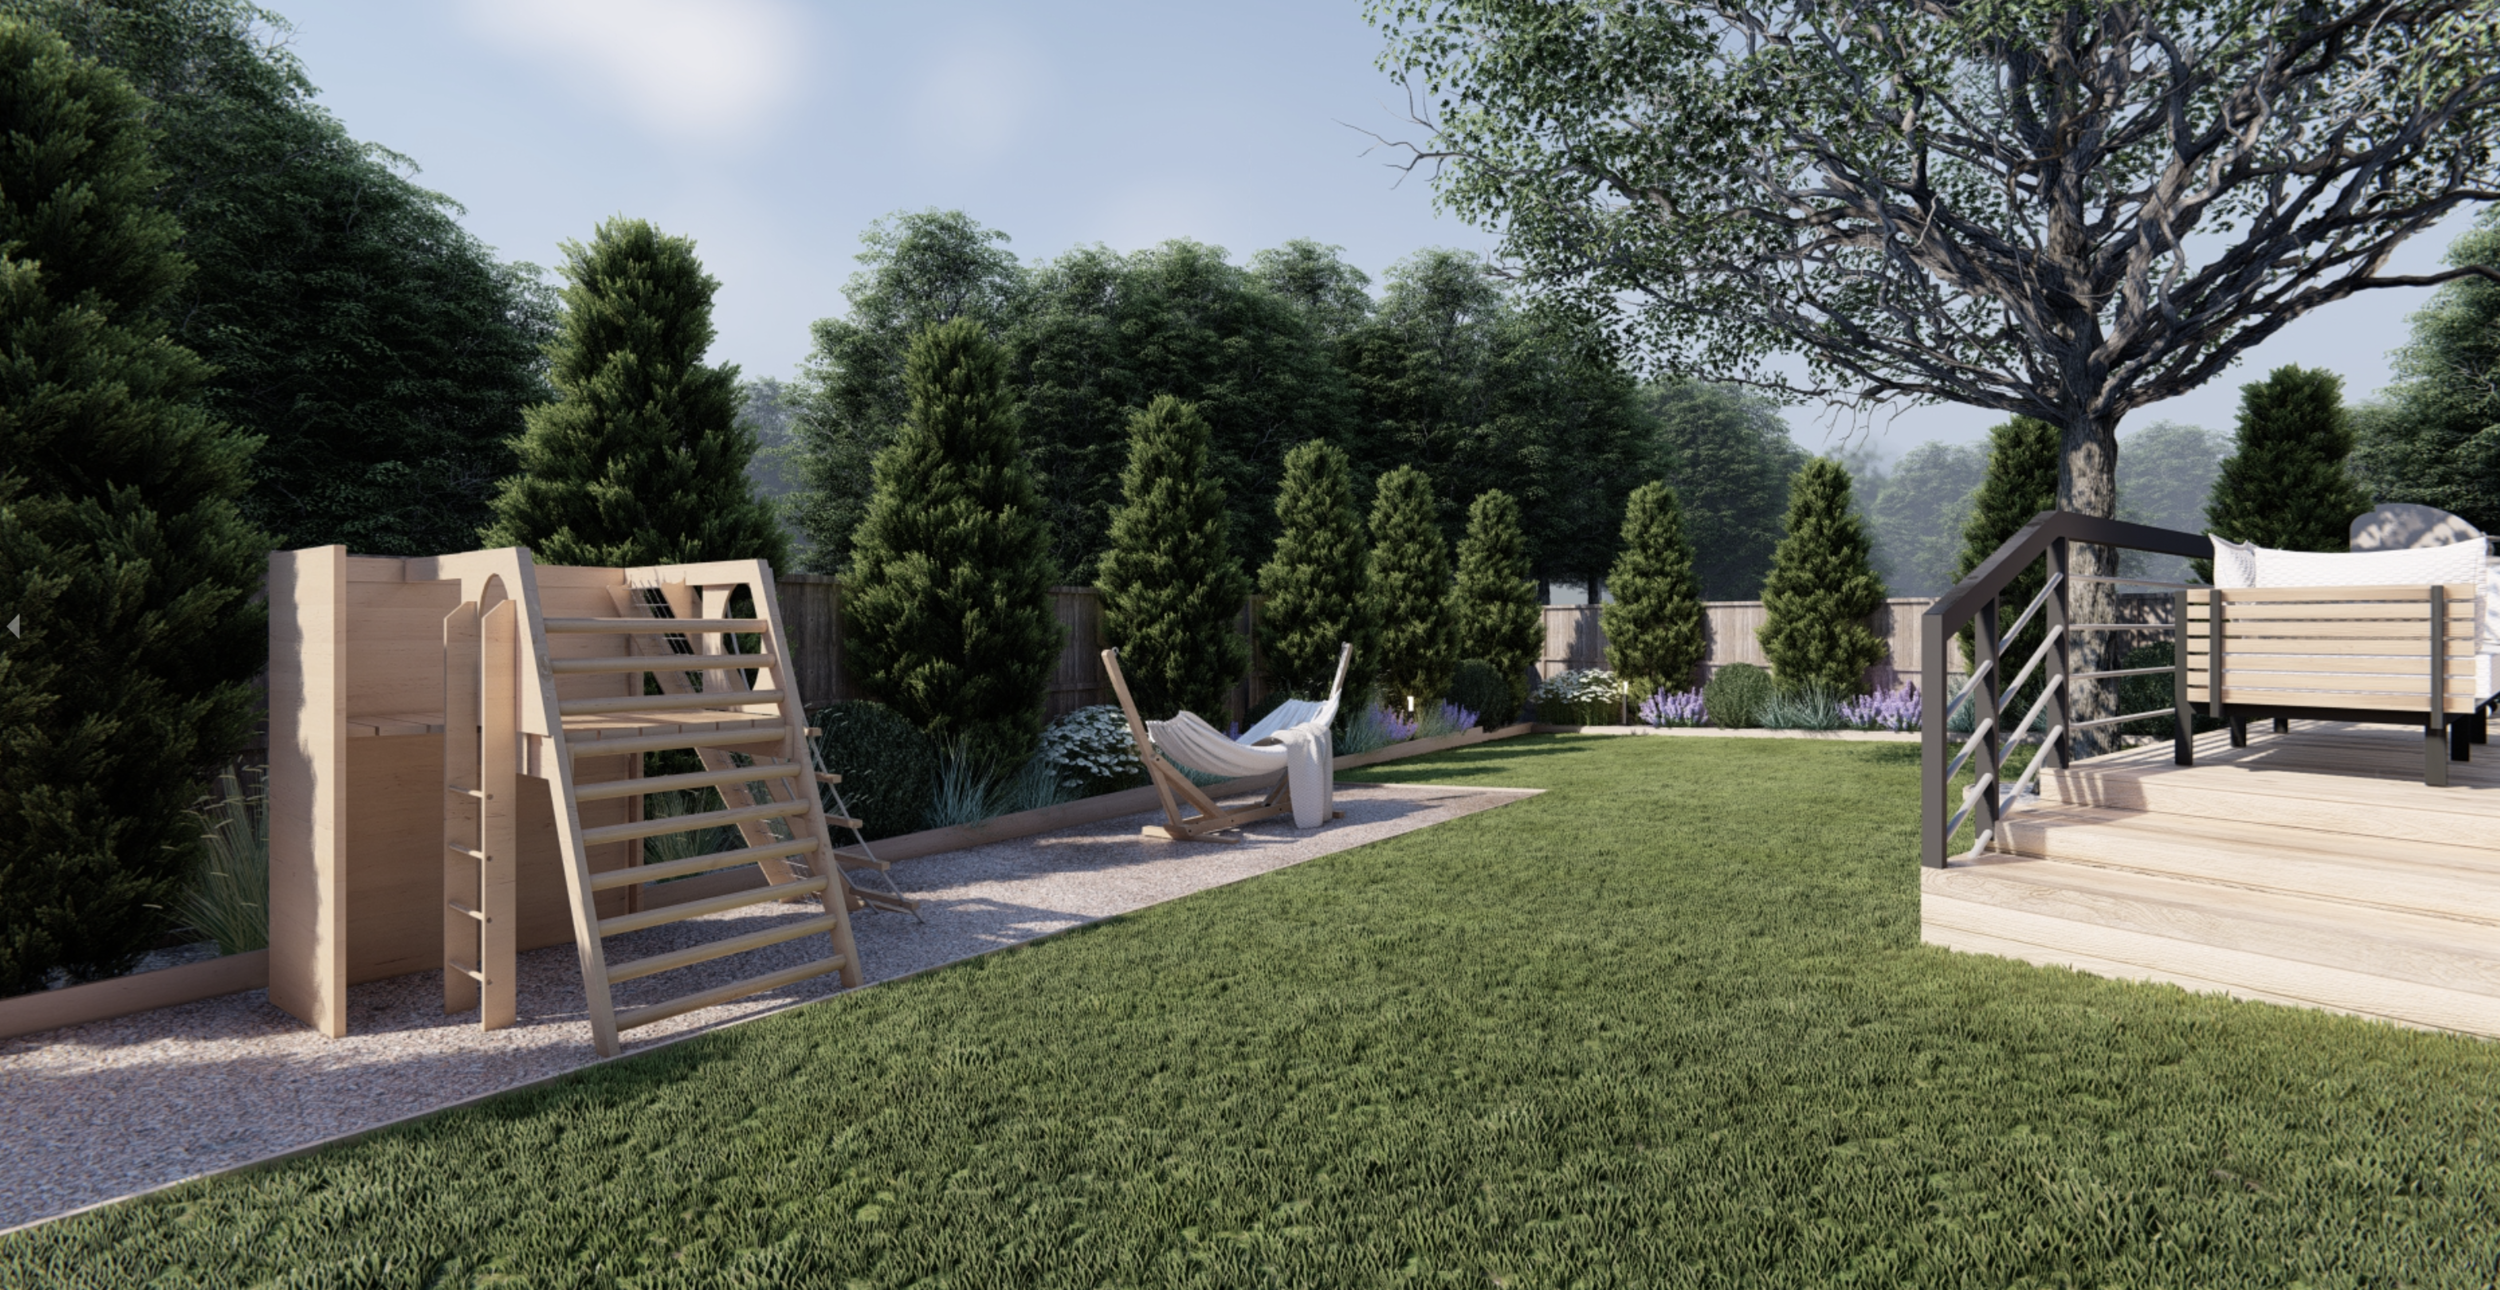 Fenced yard with ornamental plants, wooden deck, outdoor sofa, kids wood climbing frame and hammock.